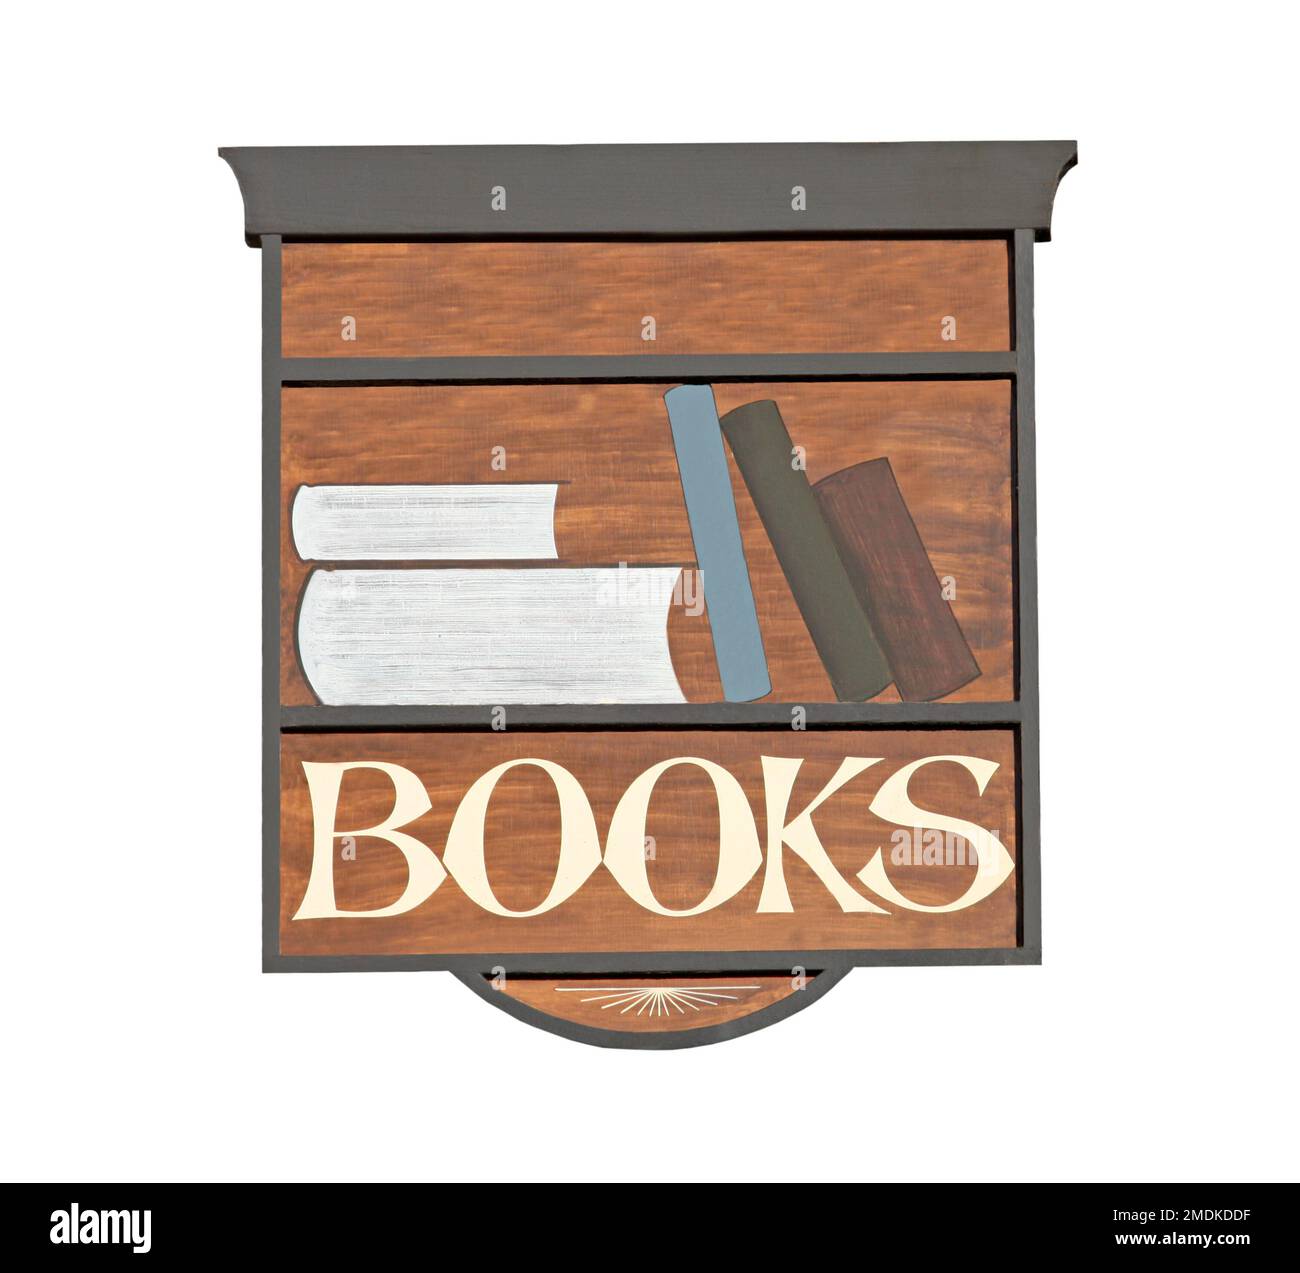 A Wooden Notice Sign for a Book Shop. Stock Photo